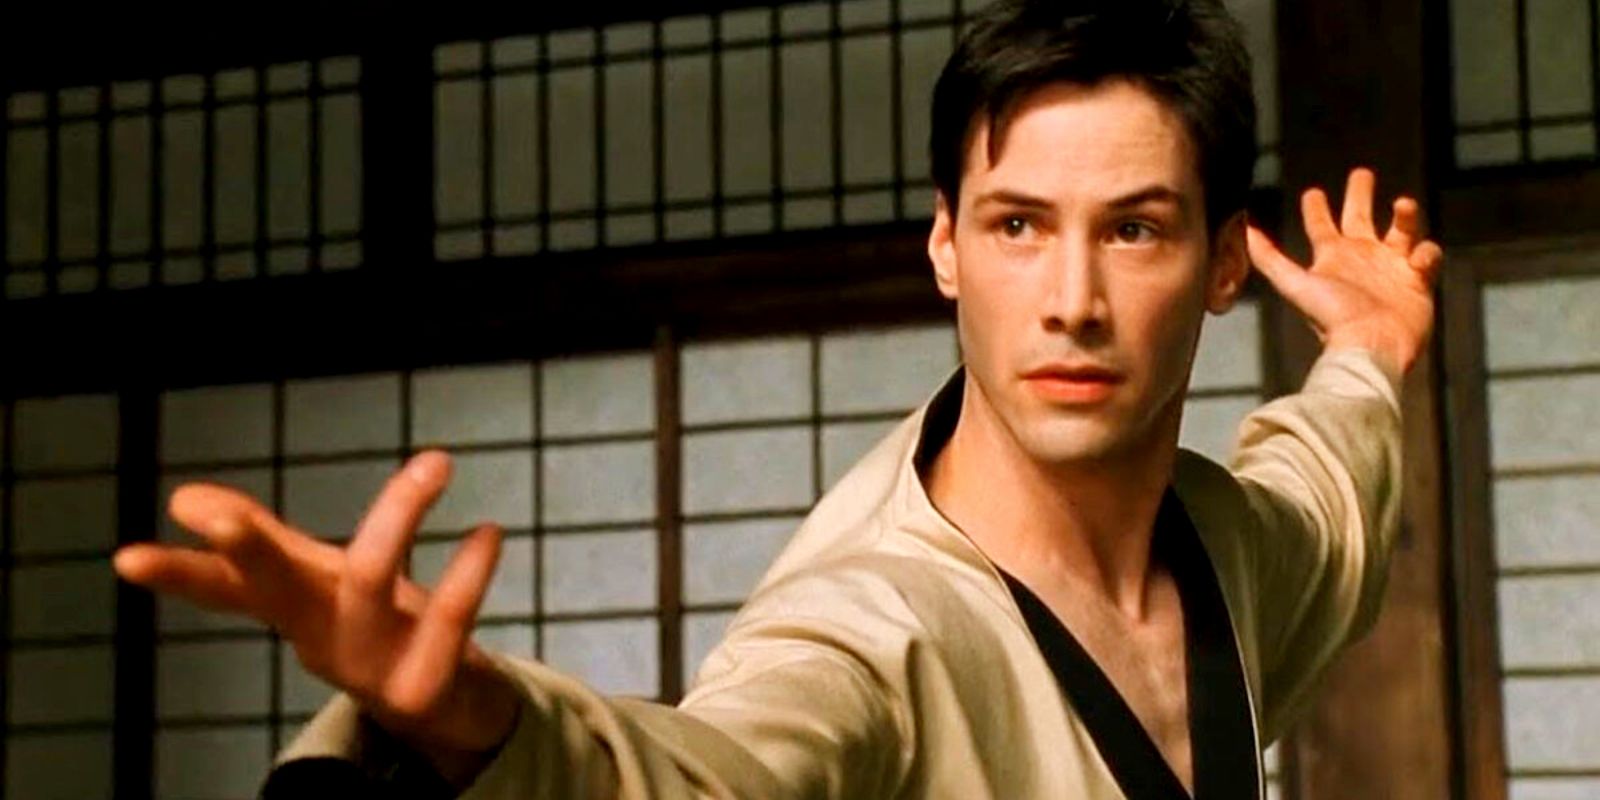 Keanu Reeves in a Dojo, holding his hands up 